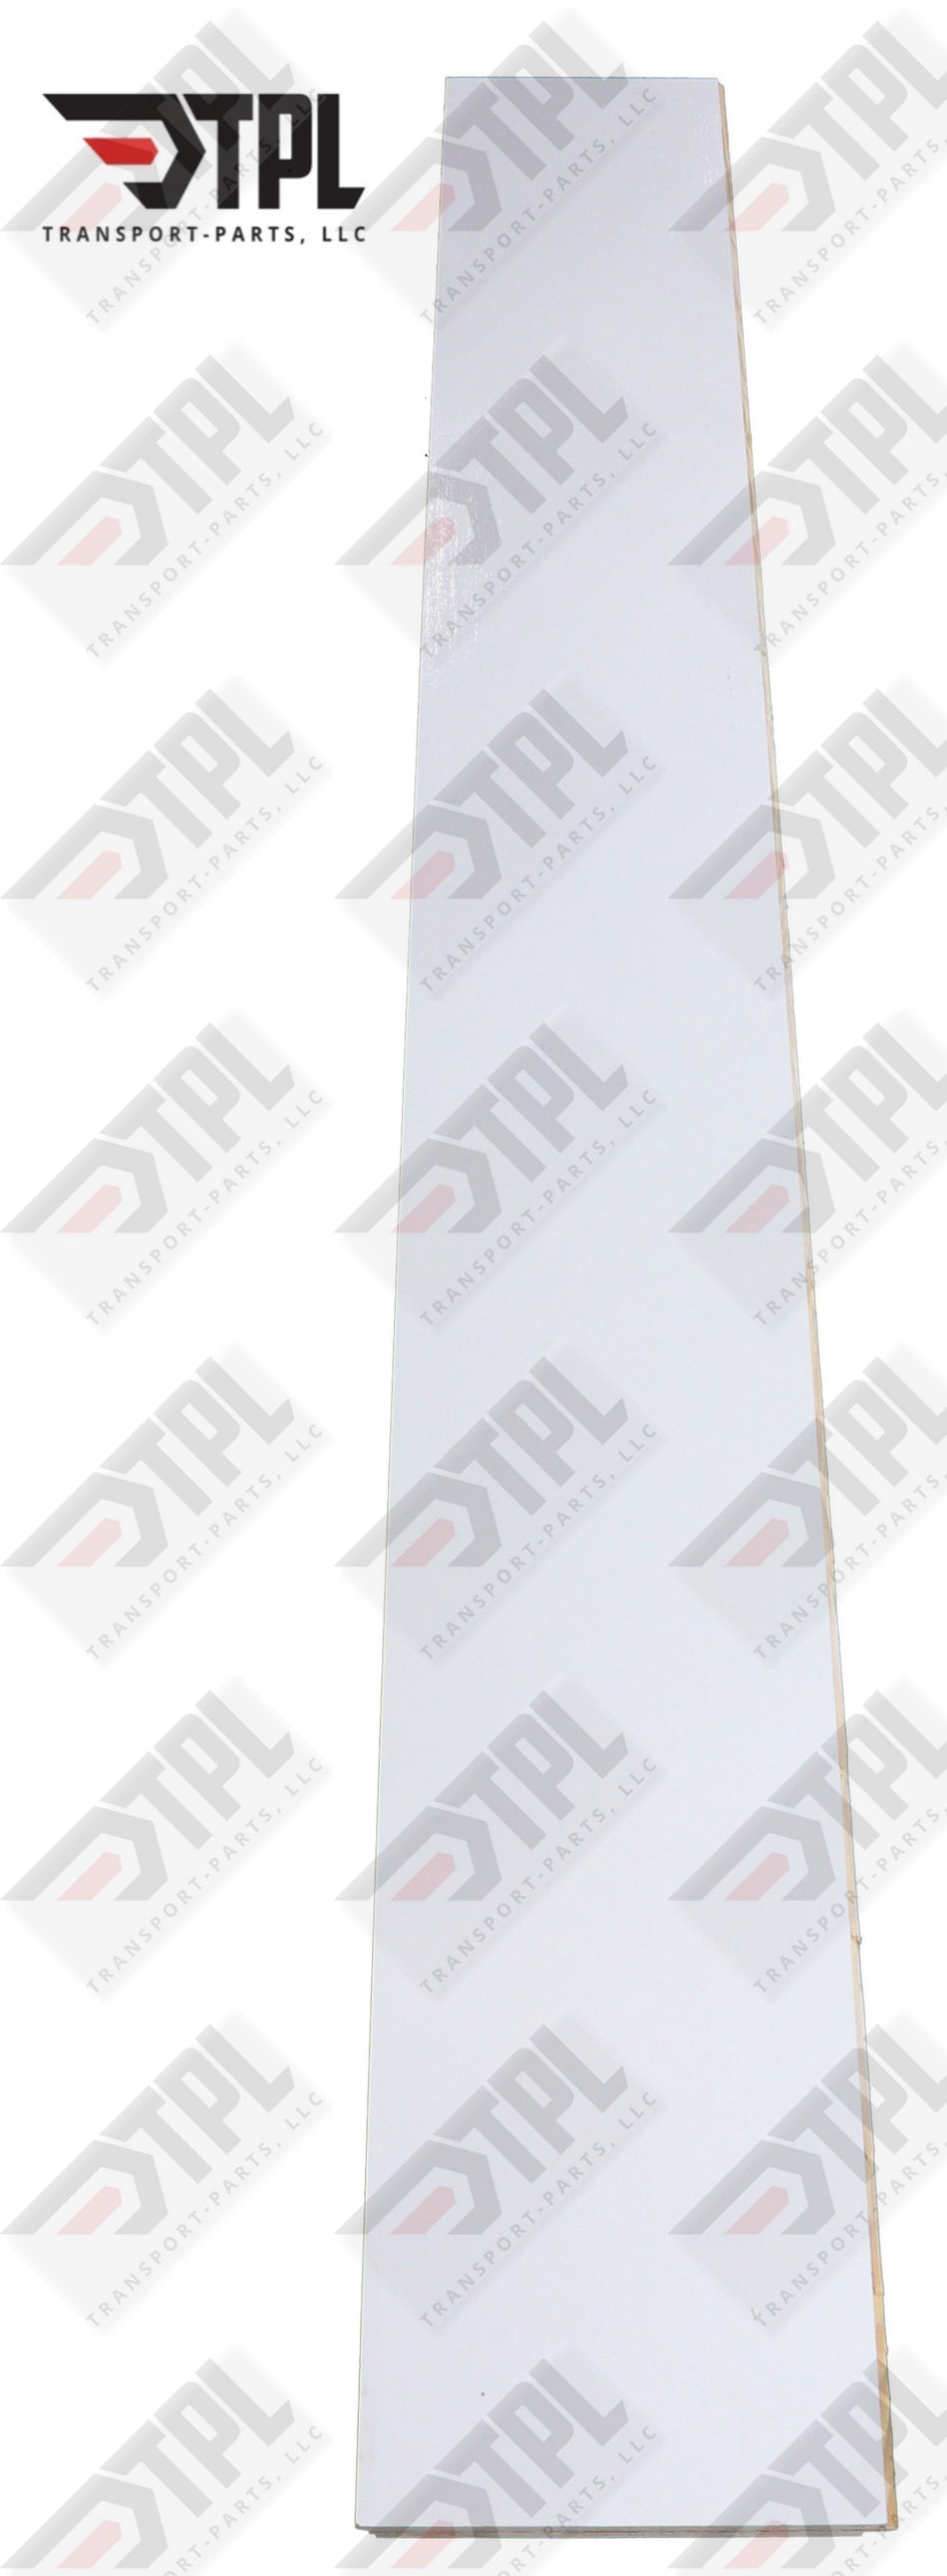 15" x 90" Intermediate Panel - PPW - No Routes – Boxed